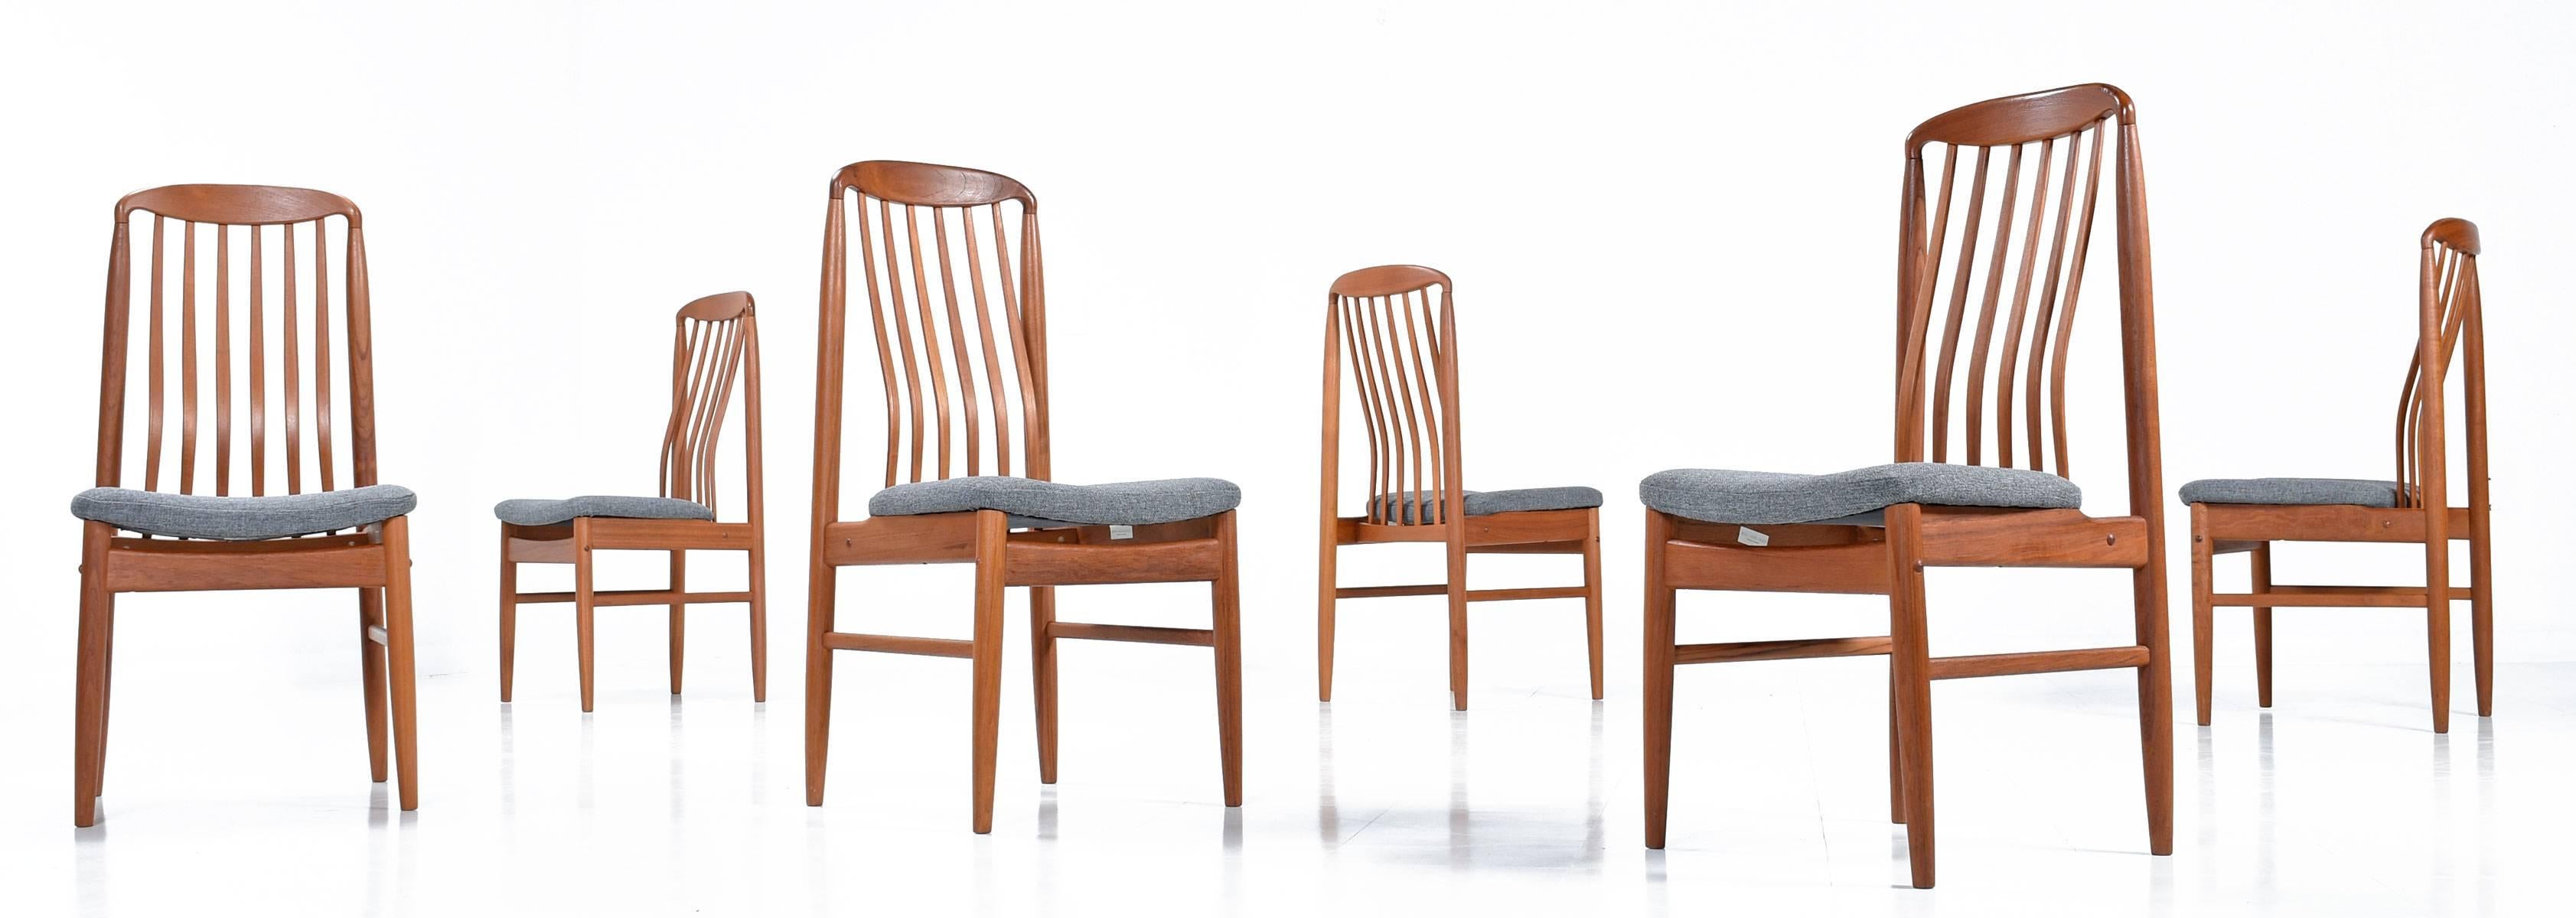 Set of six pre-owned Danish modern style dining chairs by Benny Linden. Crafted in South Asia, made of hand sanded solid teak and European hardware. These chairs are as comfortable as they are beautiful with the contoured backrest supporting the